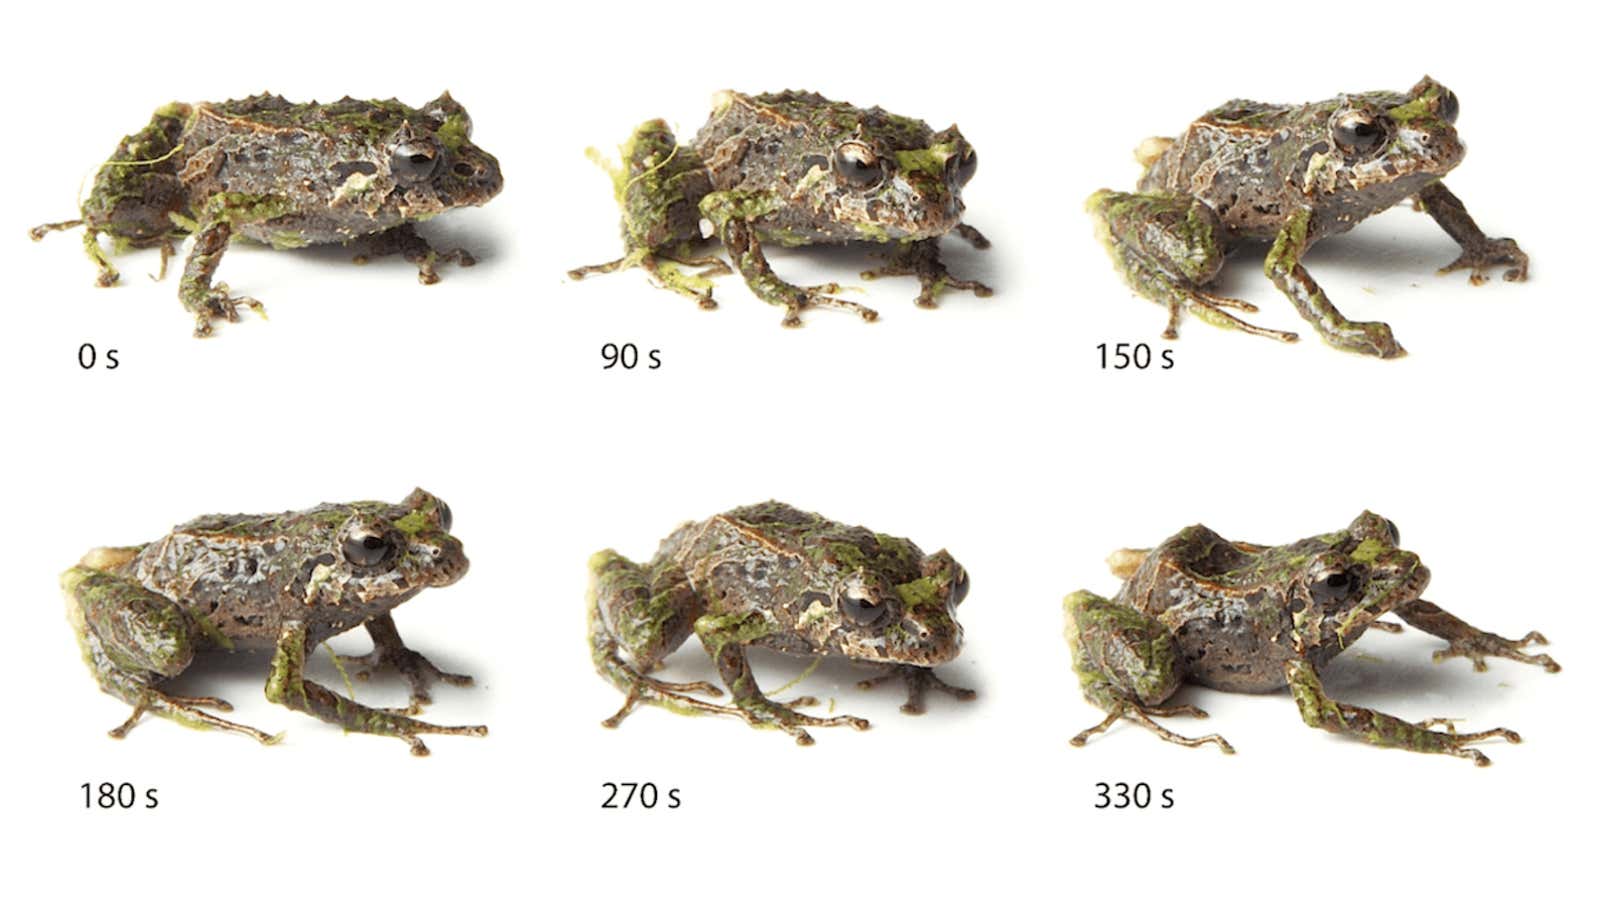 This shapeshifting frog can morph from smooth to spiny in seconds